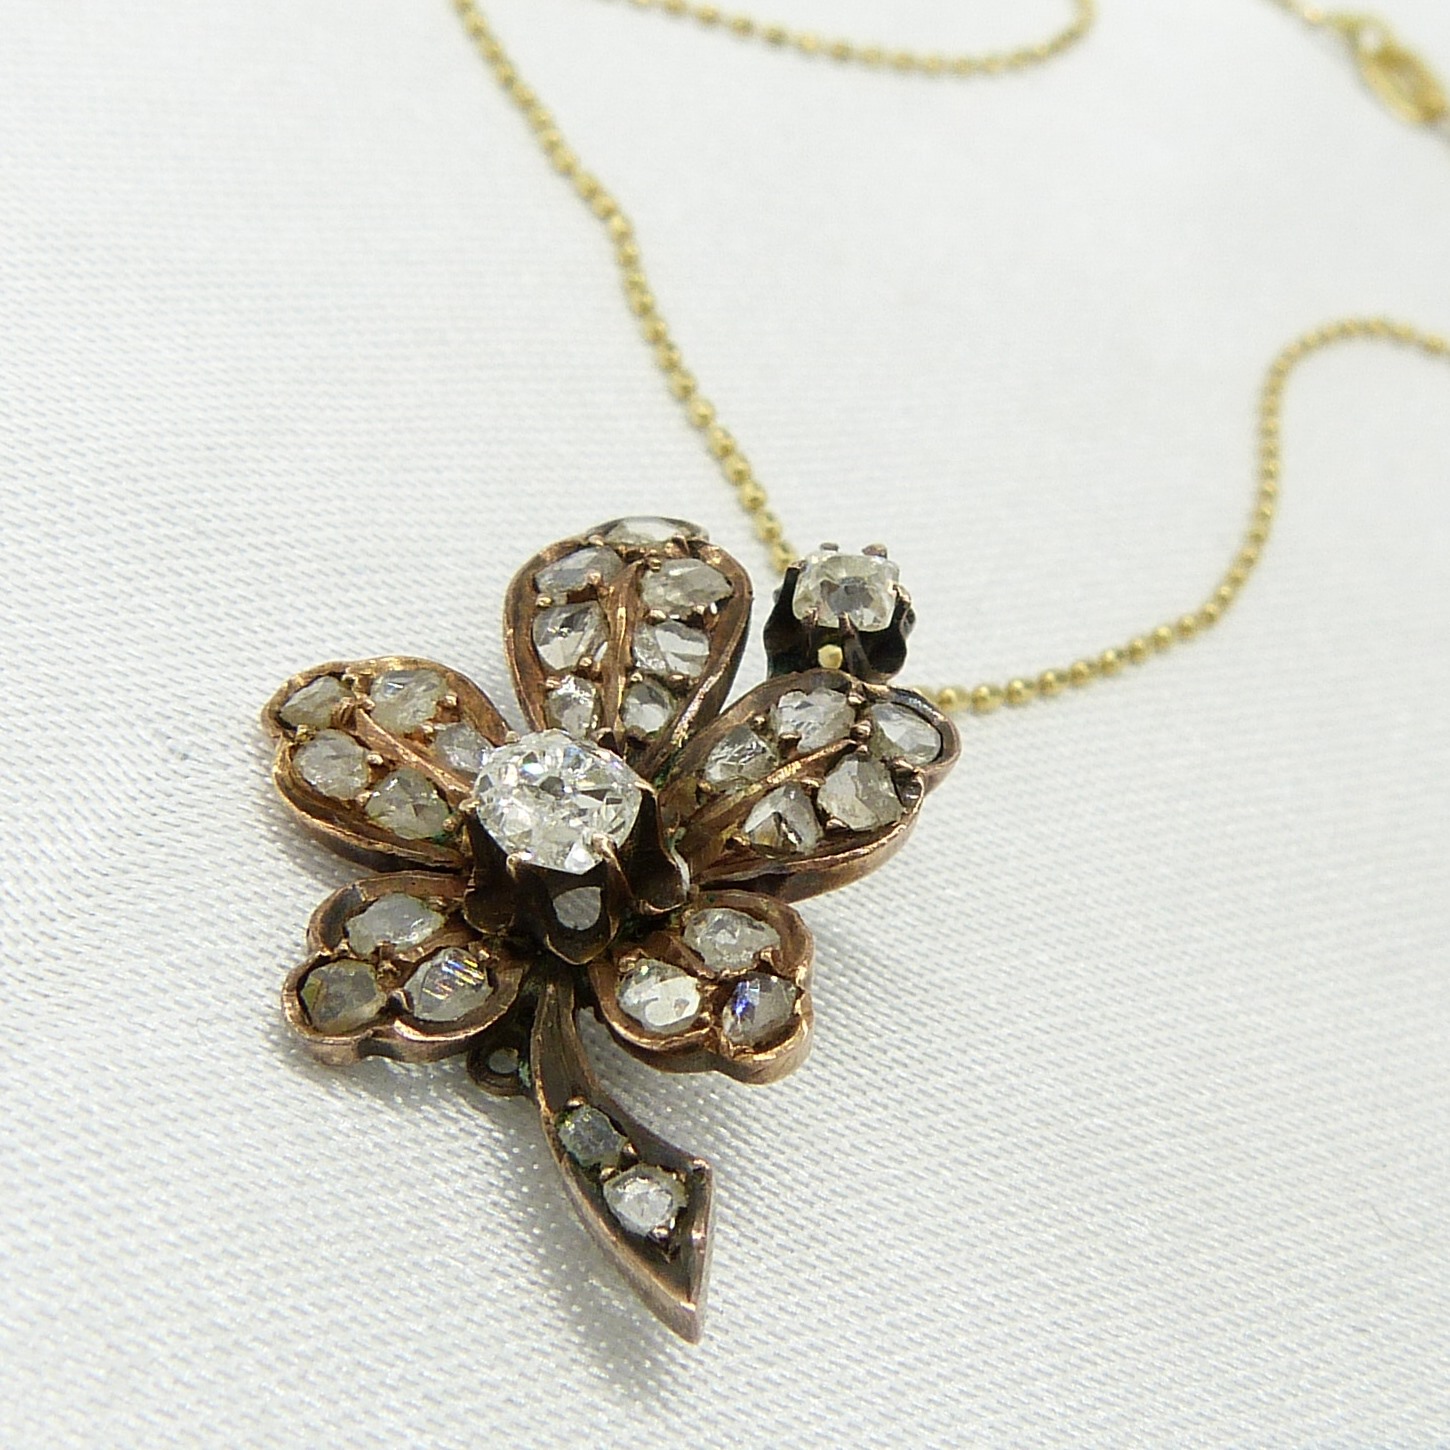 Antique old-cut and rose-cut diamond set flower pendant and chain, 14ct gold - Image 7 of 7